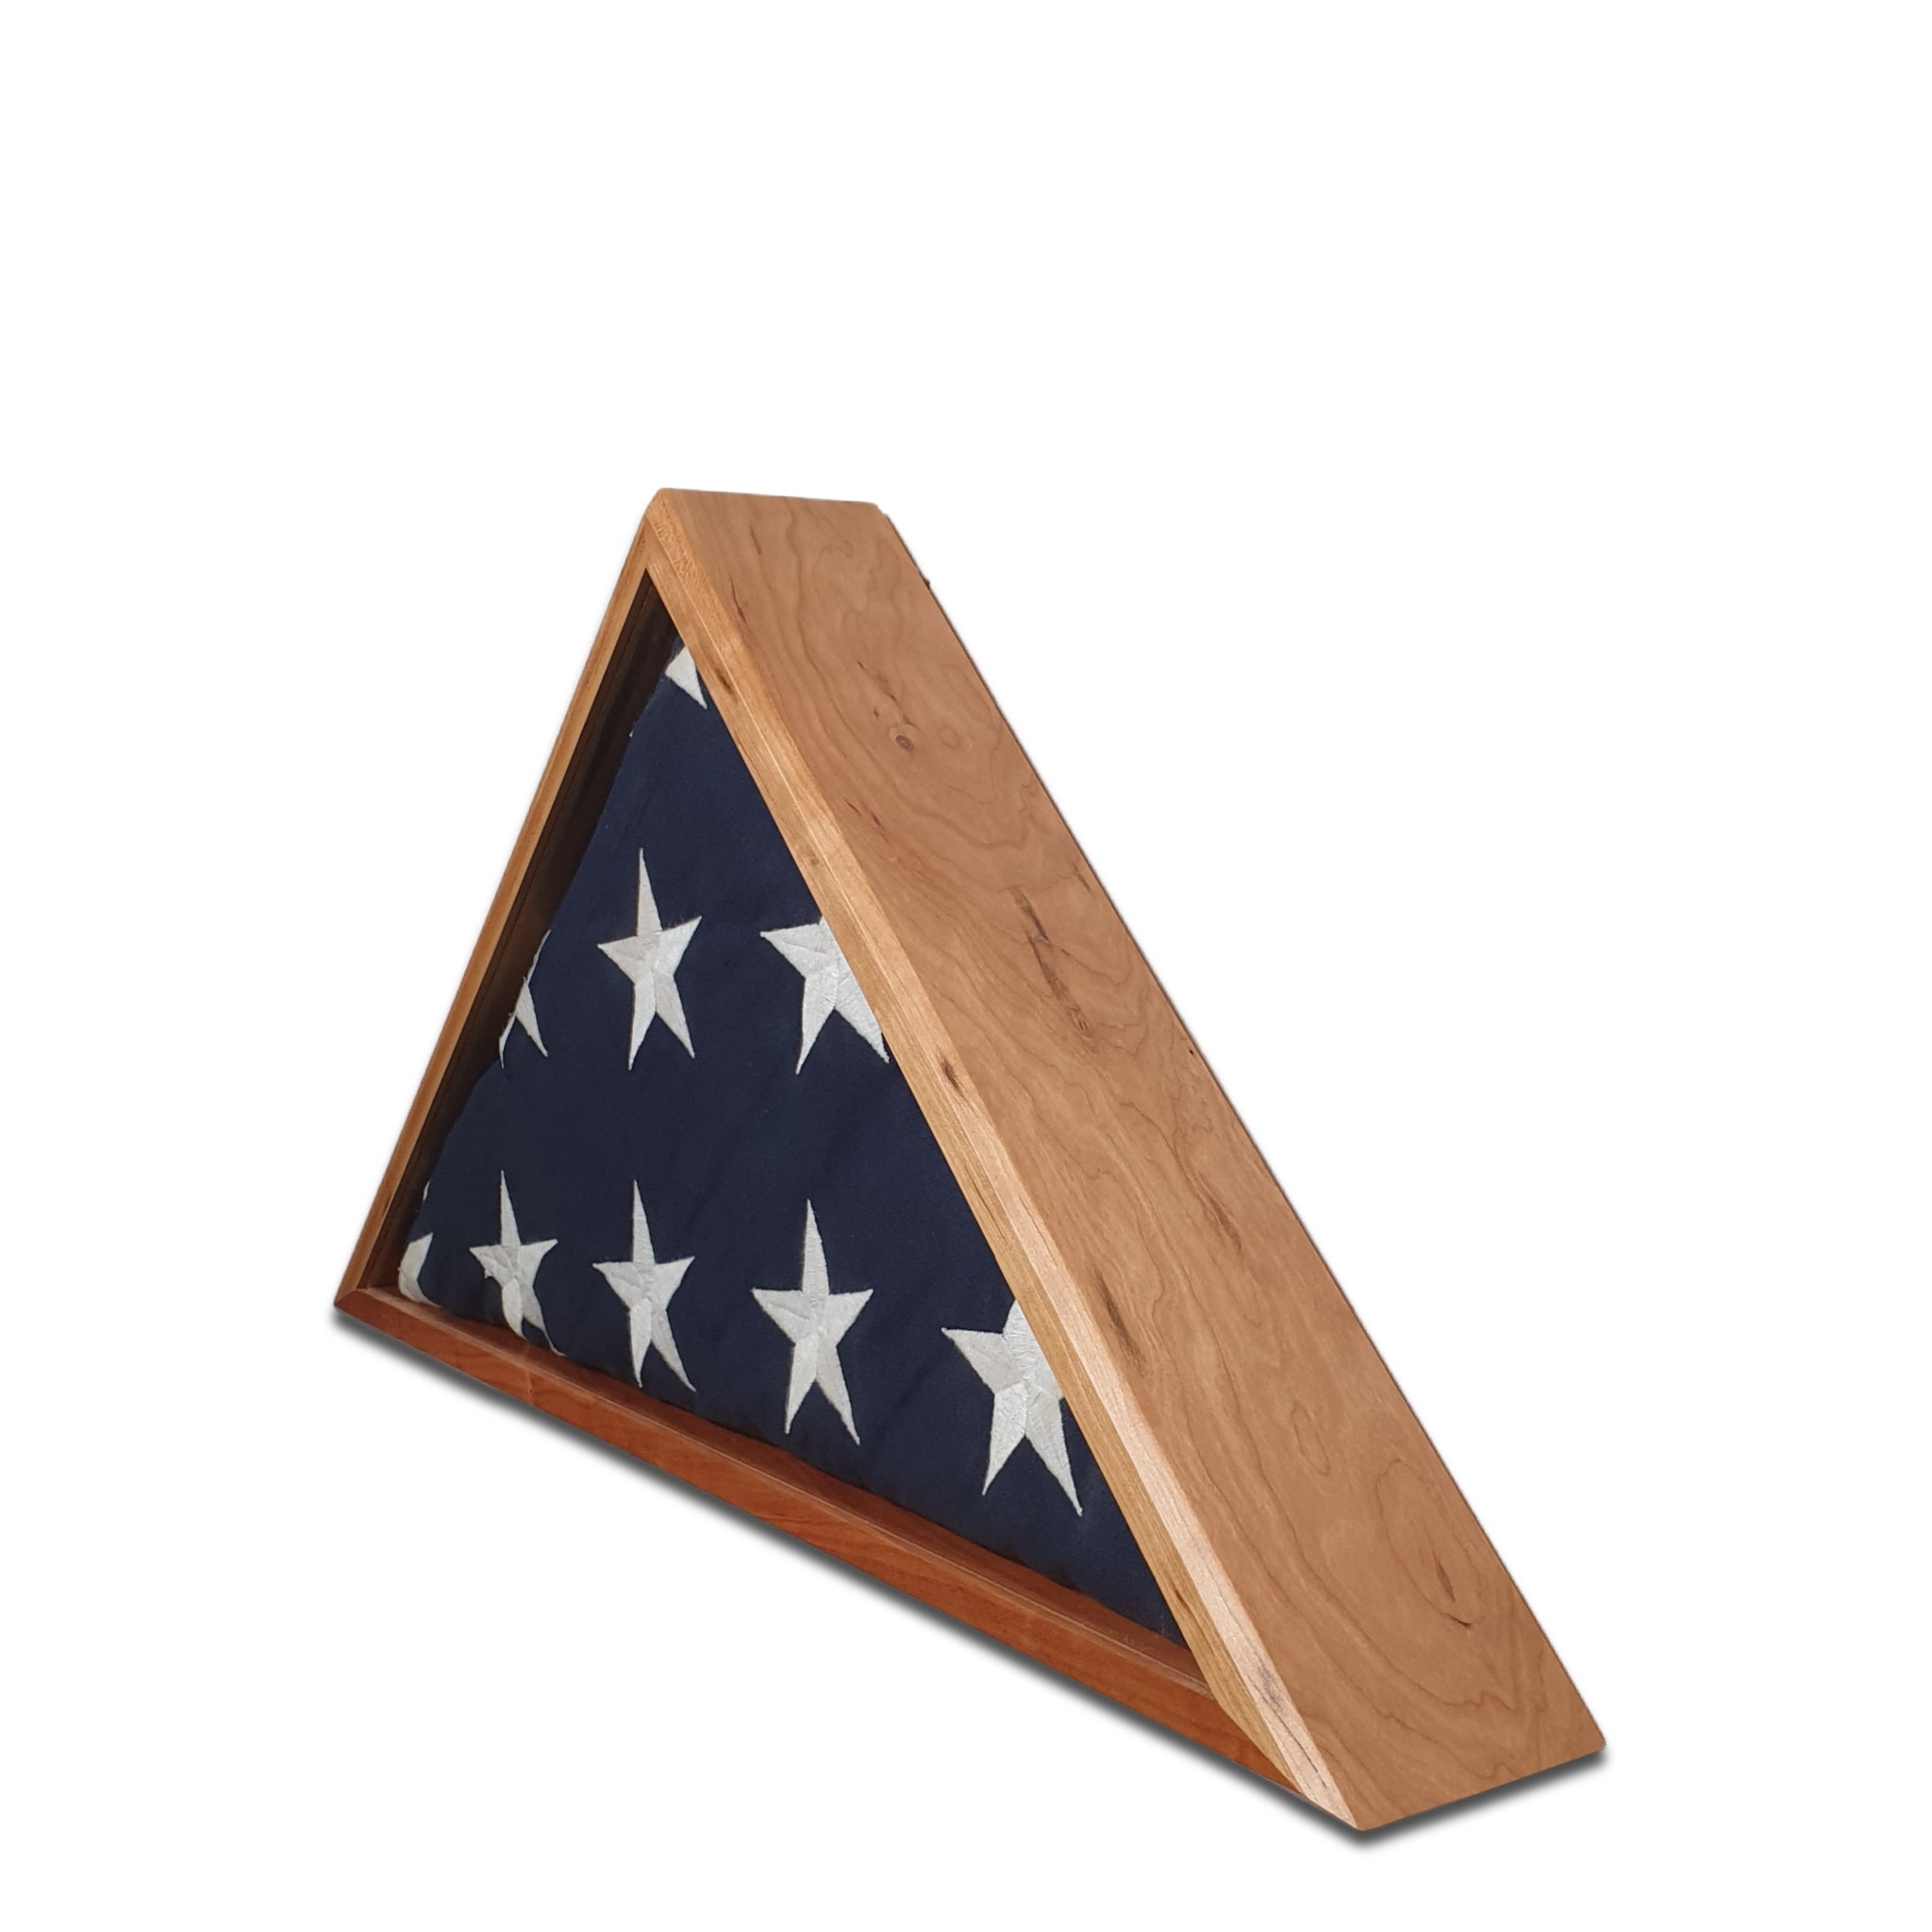 Burial Memorial Flag Display Case for deceased Veteran. Holds one folded 5' by 9.5' burial flag. Made with real Cherry hardwood. American Made - Veteran Built.